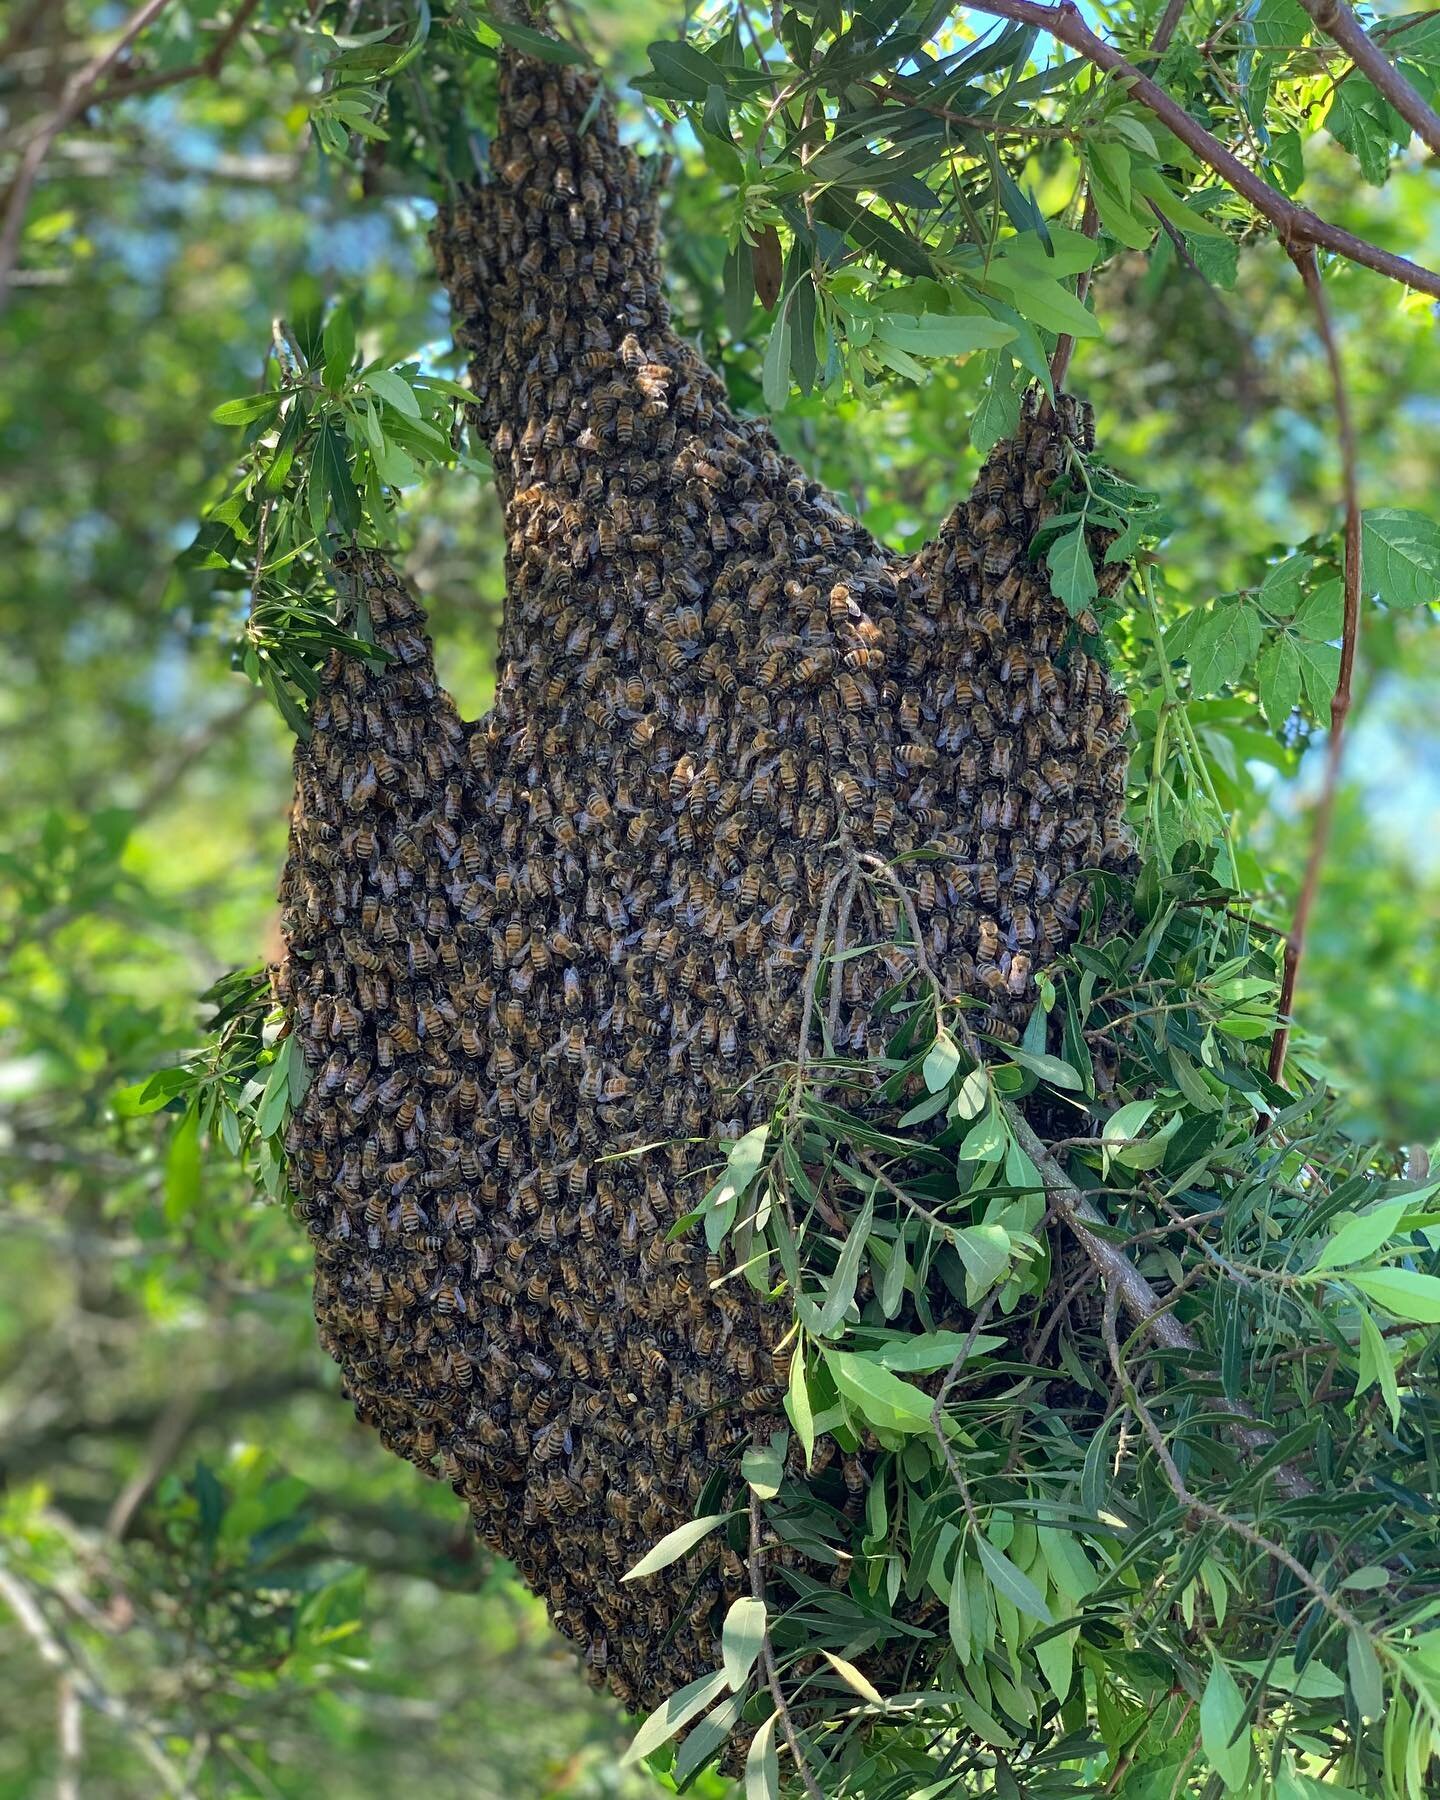 Just what joey wants to hear&hellip;. Another swarm 😂